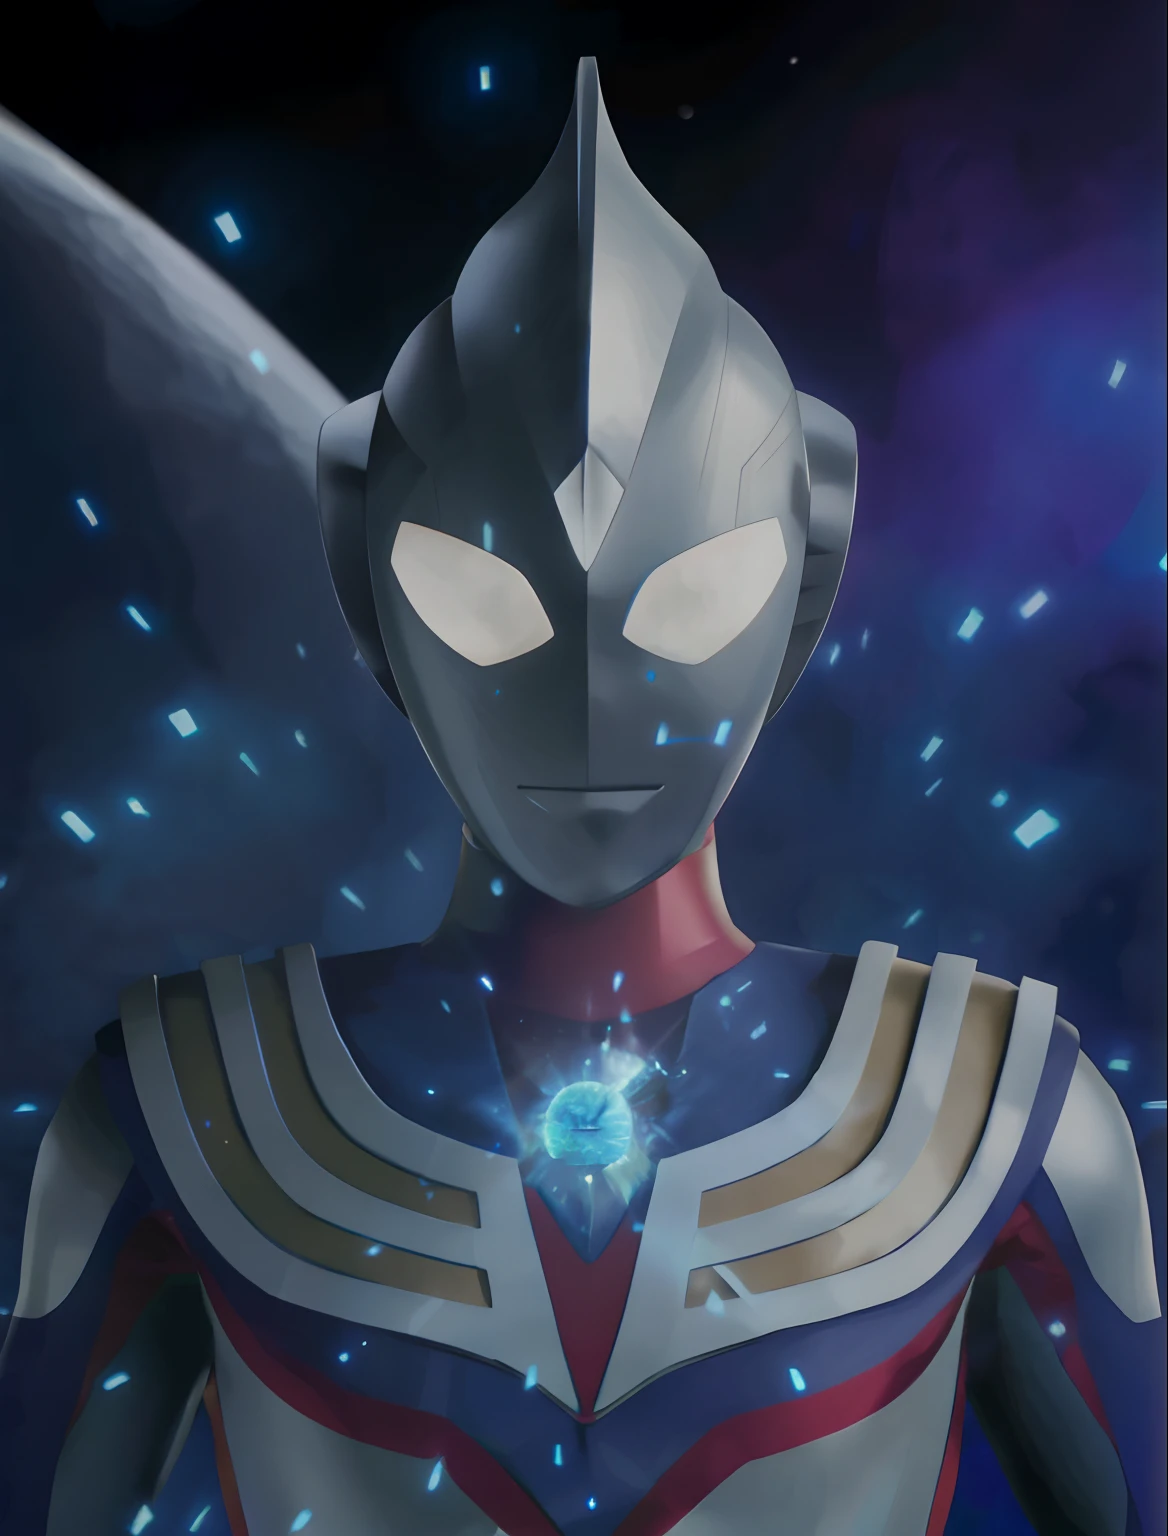 A close-up of a man in a spacesuit，In the background is a star, Ultraman, an epic anime of a energy man, ultra instinct, ultra mega detailed, anime movie screenshot, screenshot from the anime film, anime cgi, japanese cgi, anime cgi style, transforming into his final form, ultra hyper-detailed, Saitama, Tokusatsu